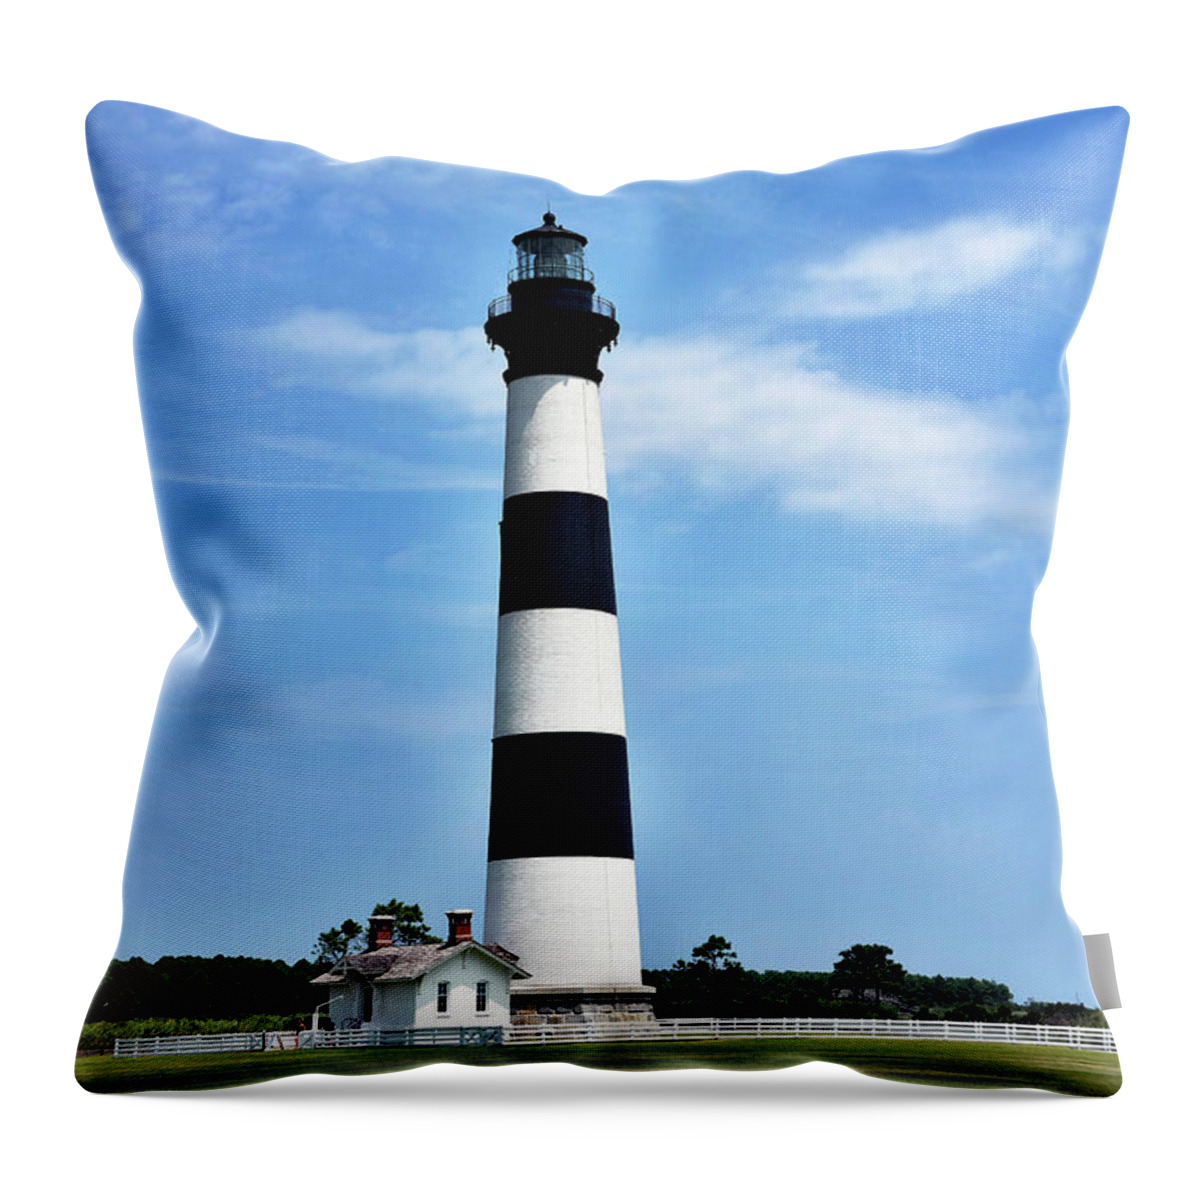 Bodie Island Lighthouse Throw Pillow featuring the photograph Bodie Island Lighthouse - Cape Hatteras National Seashore by Brendan Reals